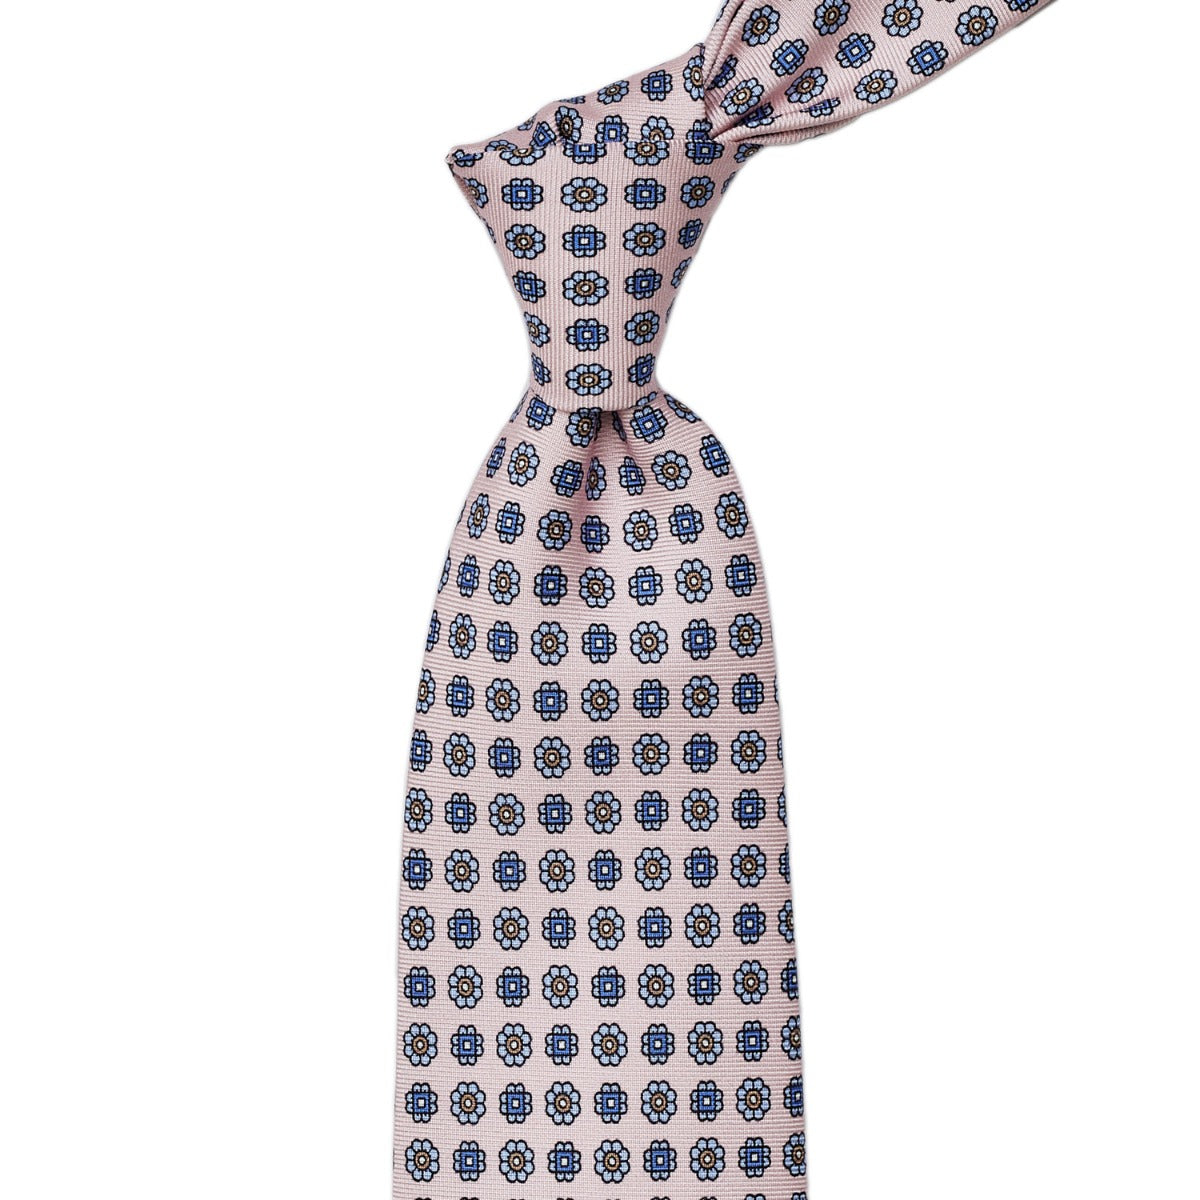 A quality Sovereign Grade Pink Floral 36oz Printed Silk Tie with pink and blue circles from KirbyAllison.com.